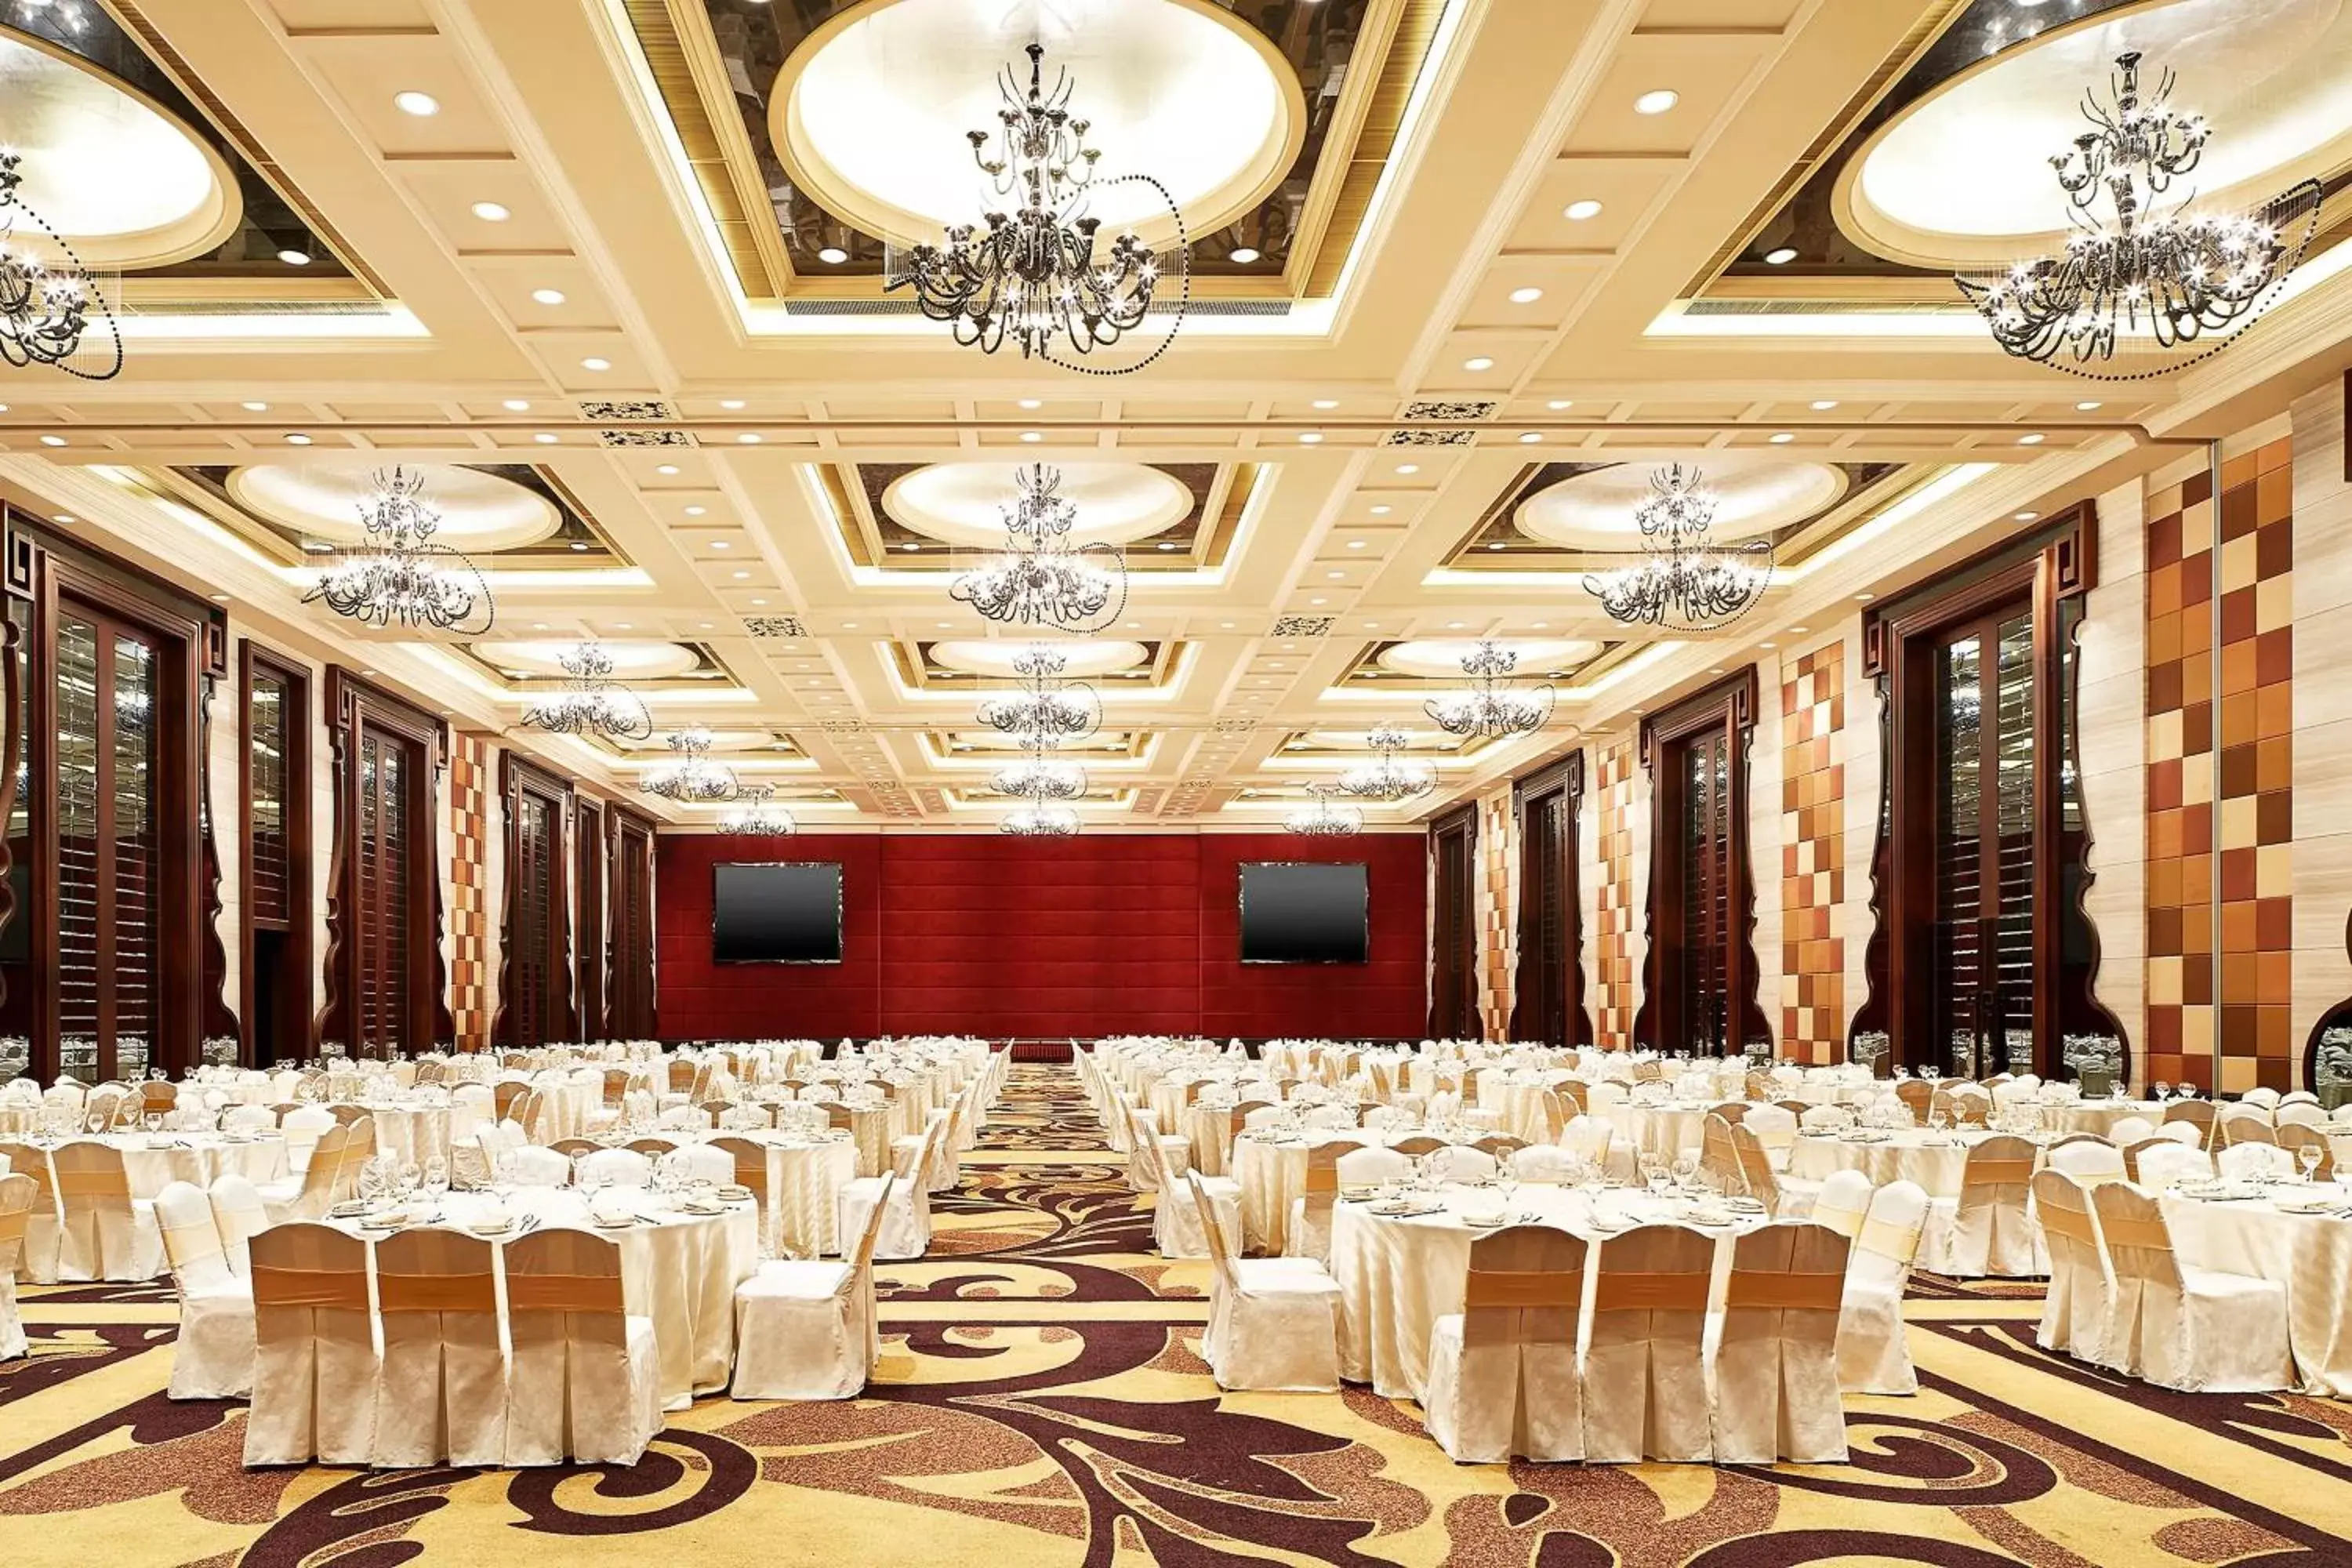 Meeting/conference room, Banquet Facilities in Sheraton Shunde Hotel